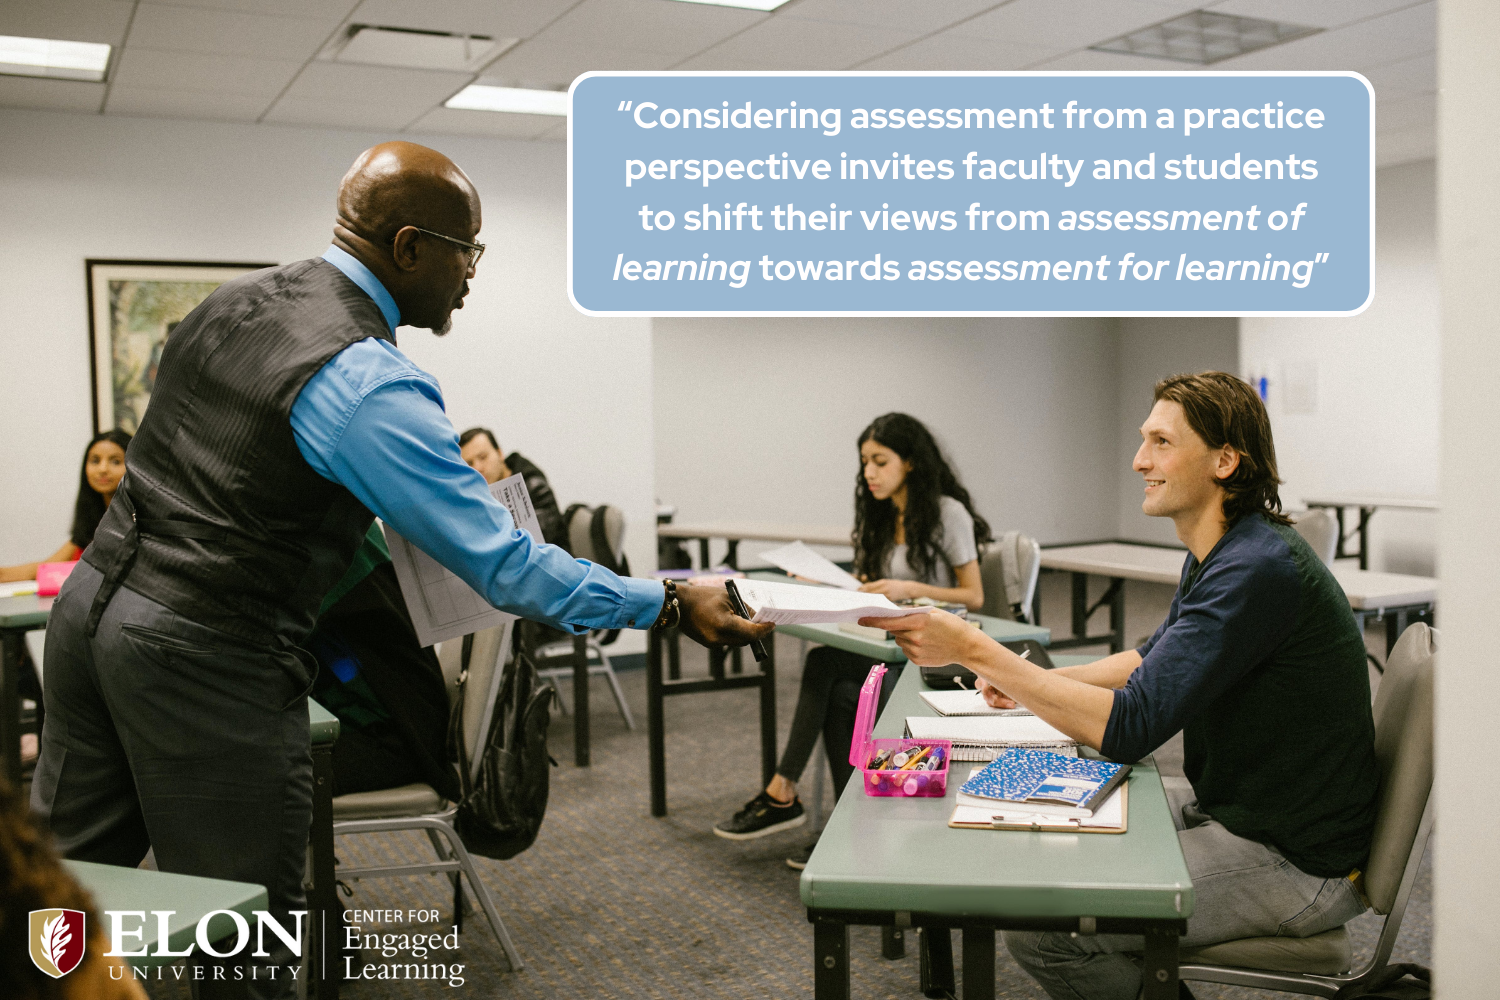 a professor passing a student a paper. "Considering assessment from a practice perspective invites faculty and students to shift their views from assessment of learning towards assessment for learning”